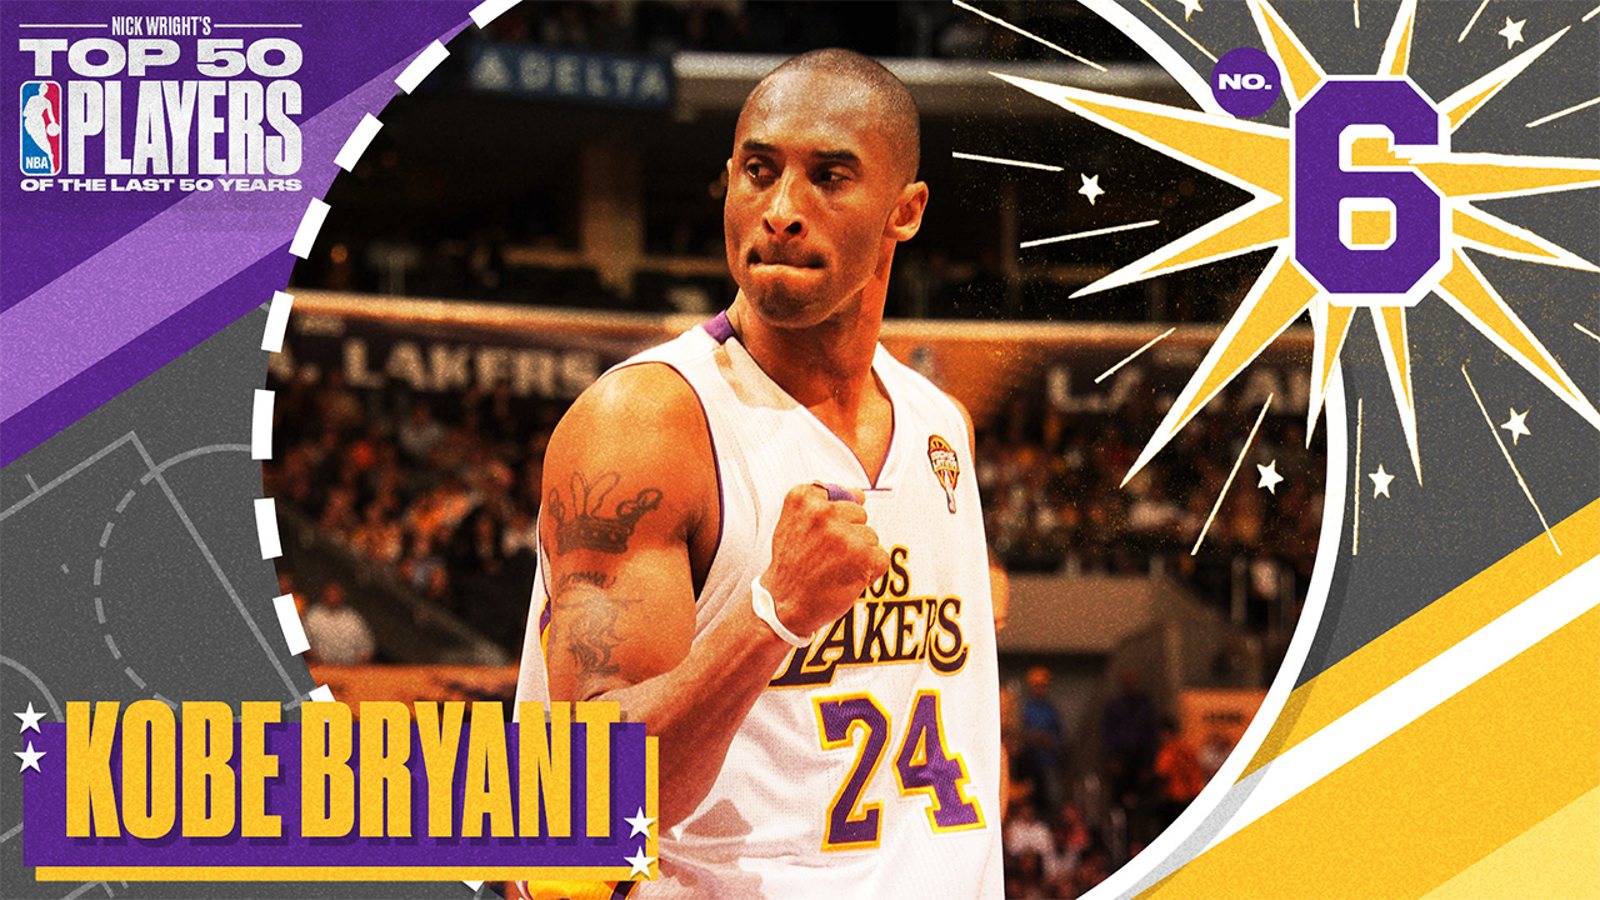 Kobe Bryant is No. 6 on Nick Wright's Top 50 NBA Players of the Last 50 Years